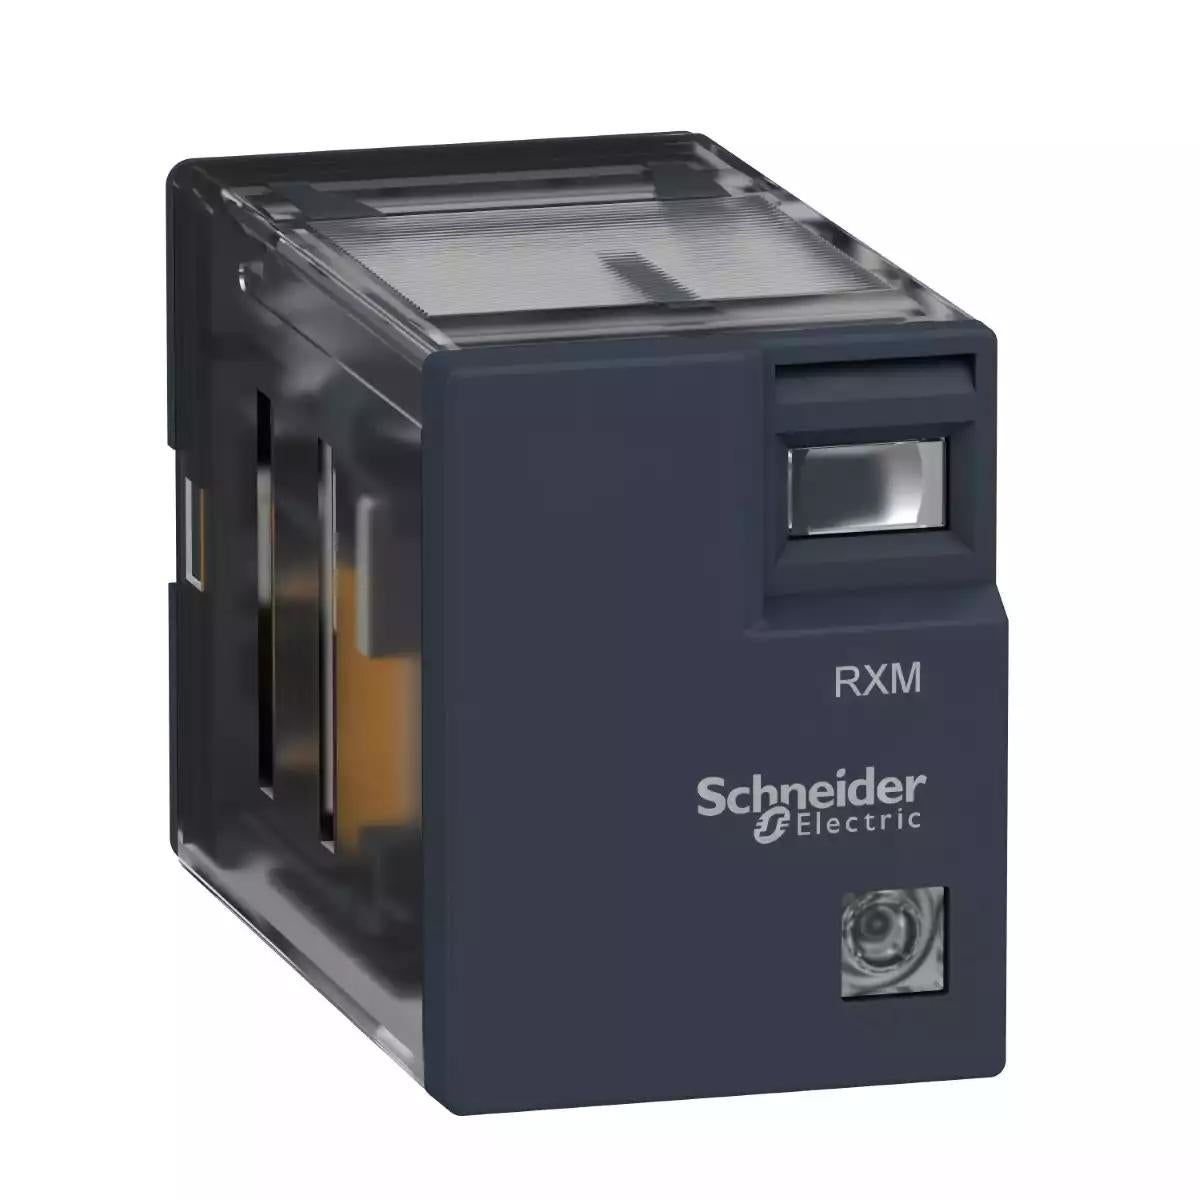 Schneider Electric miniature plug-in relay - Zelio RXM2L - 4 C/O - 12 V DC - 3 A - without LED